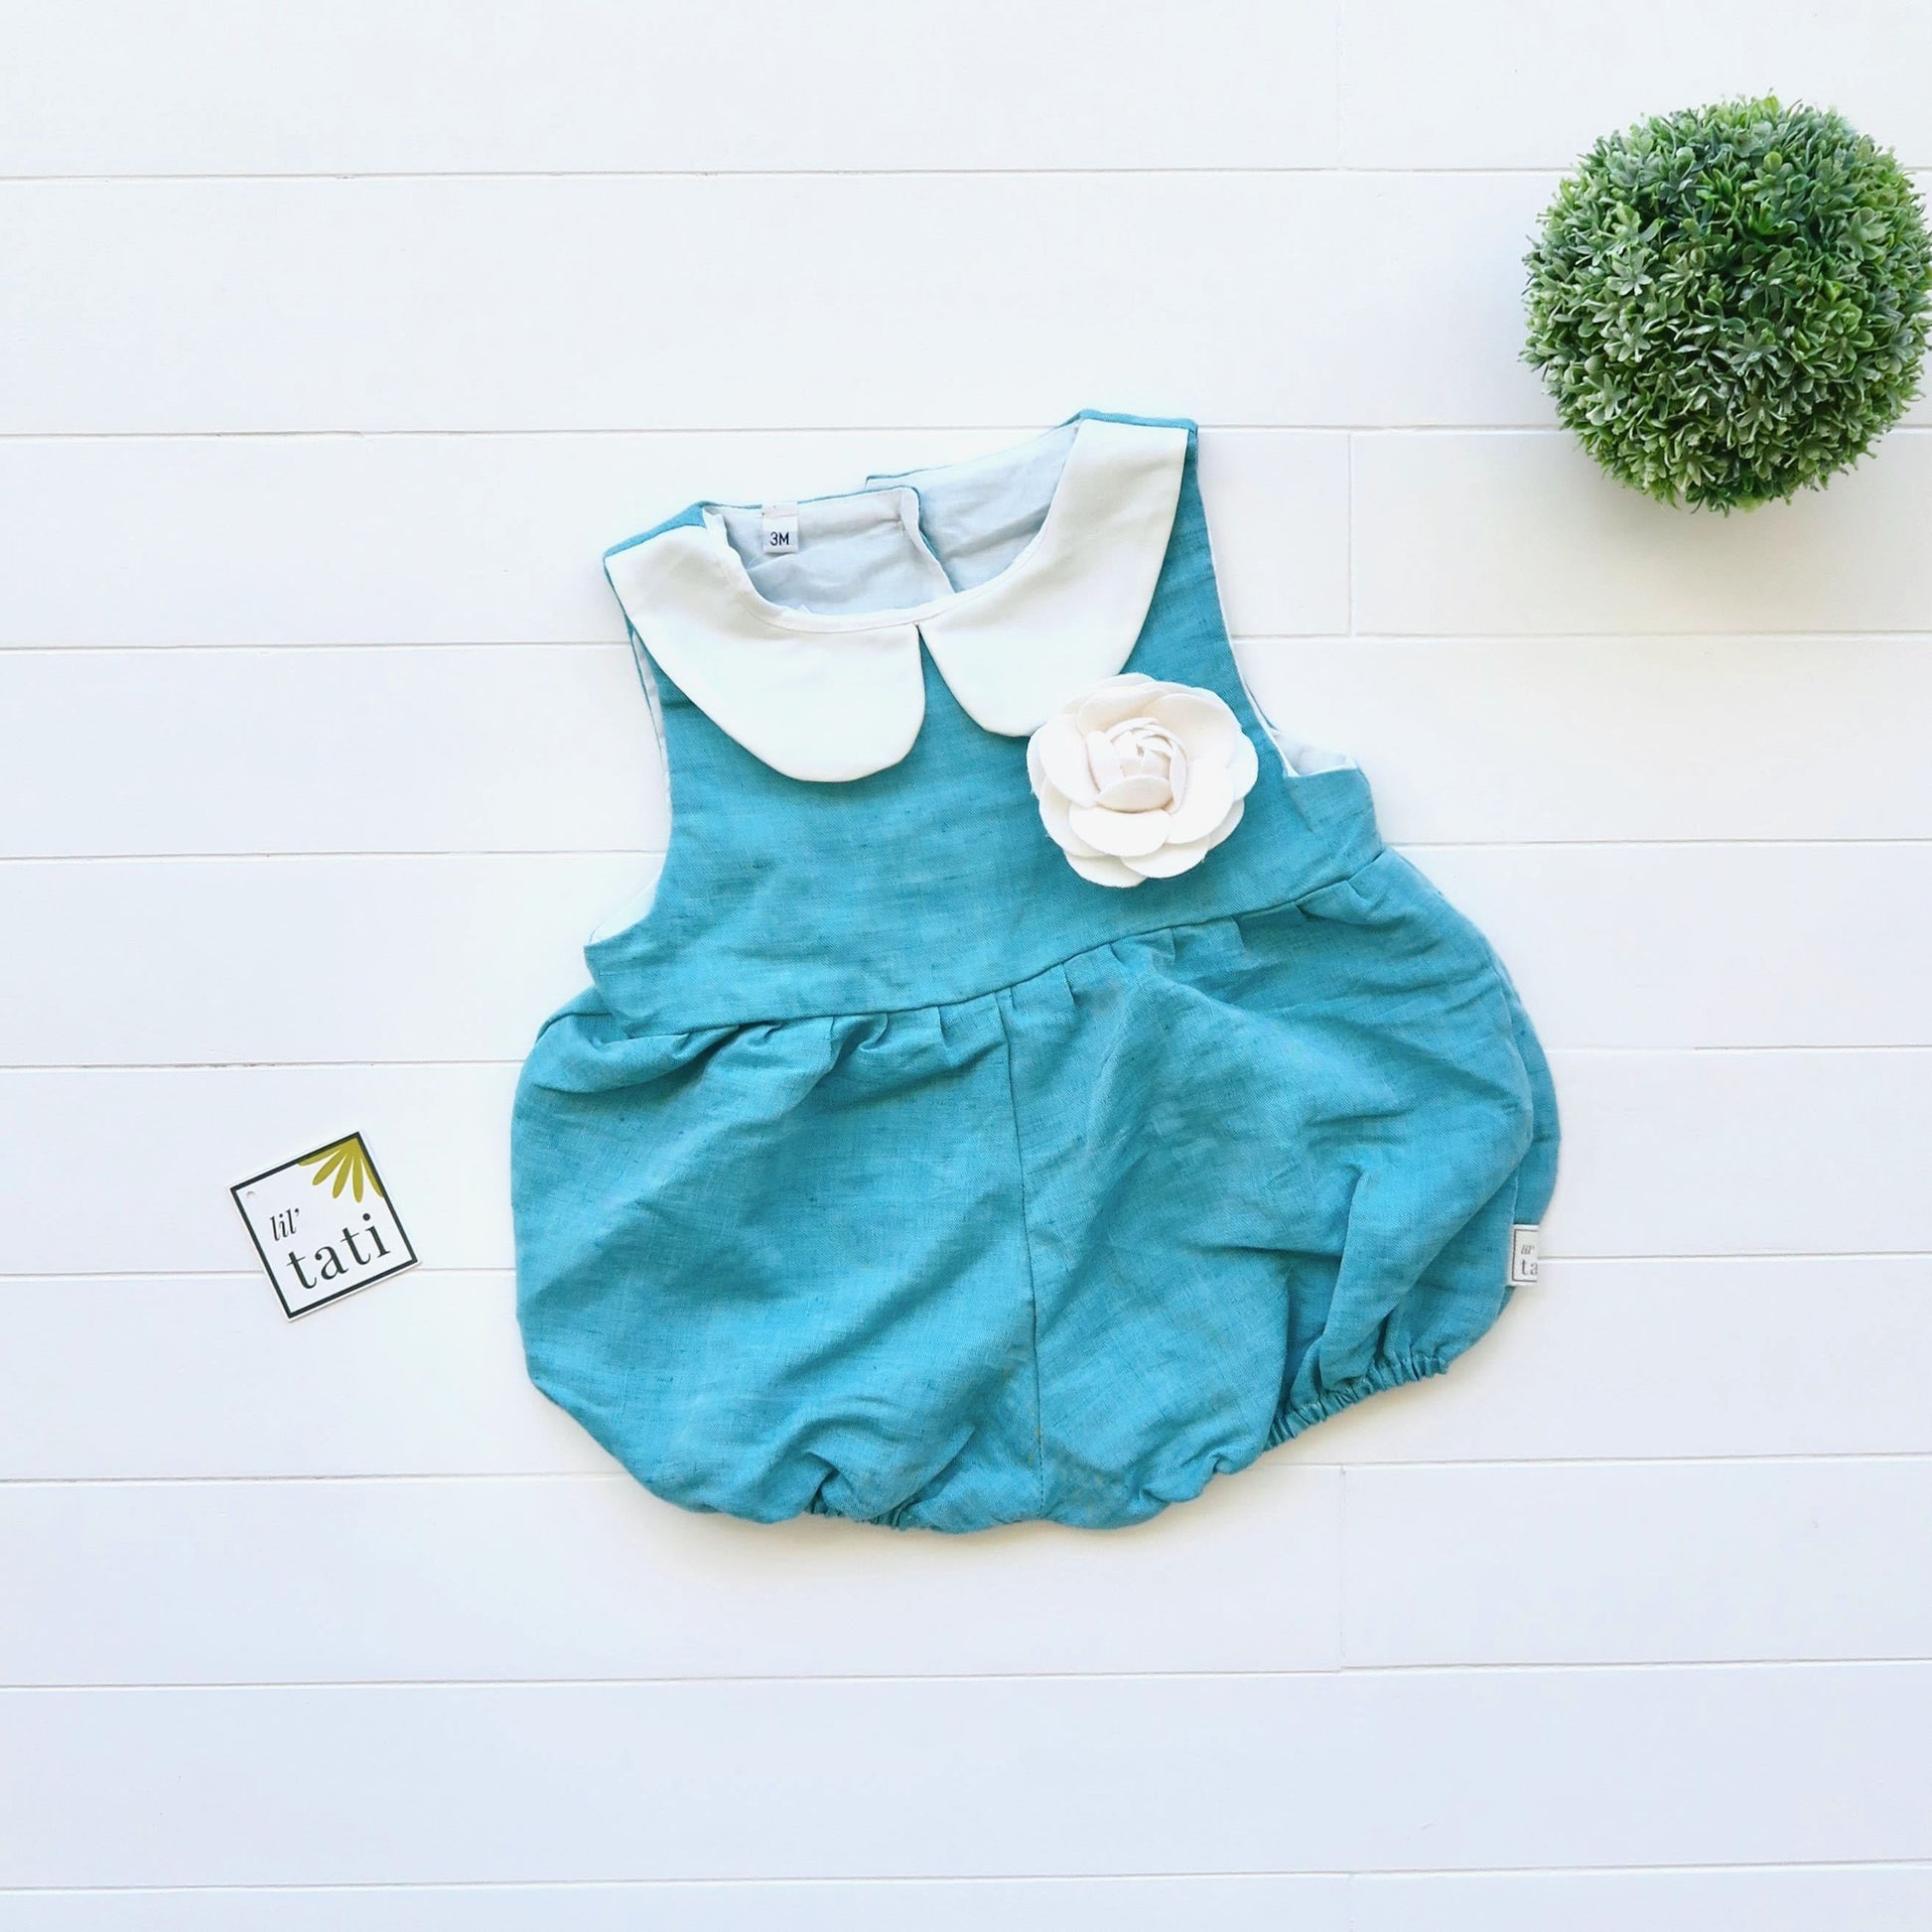 Orchid Playsuit - Collar in Teal Linen - Lil' Tati